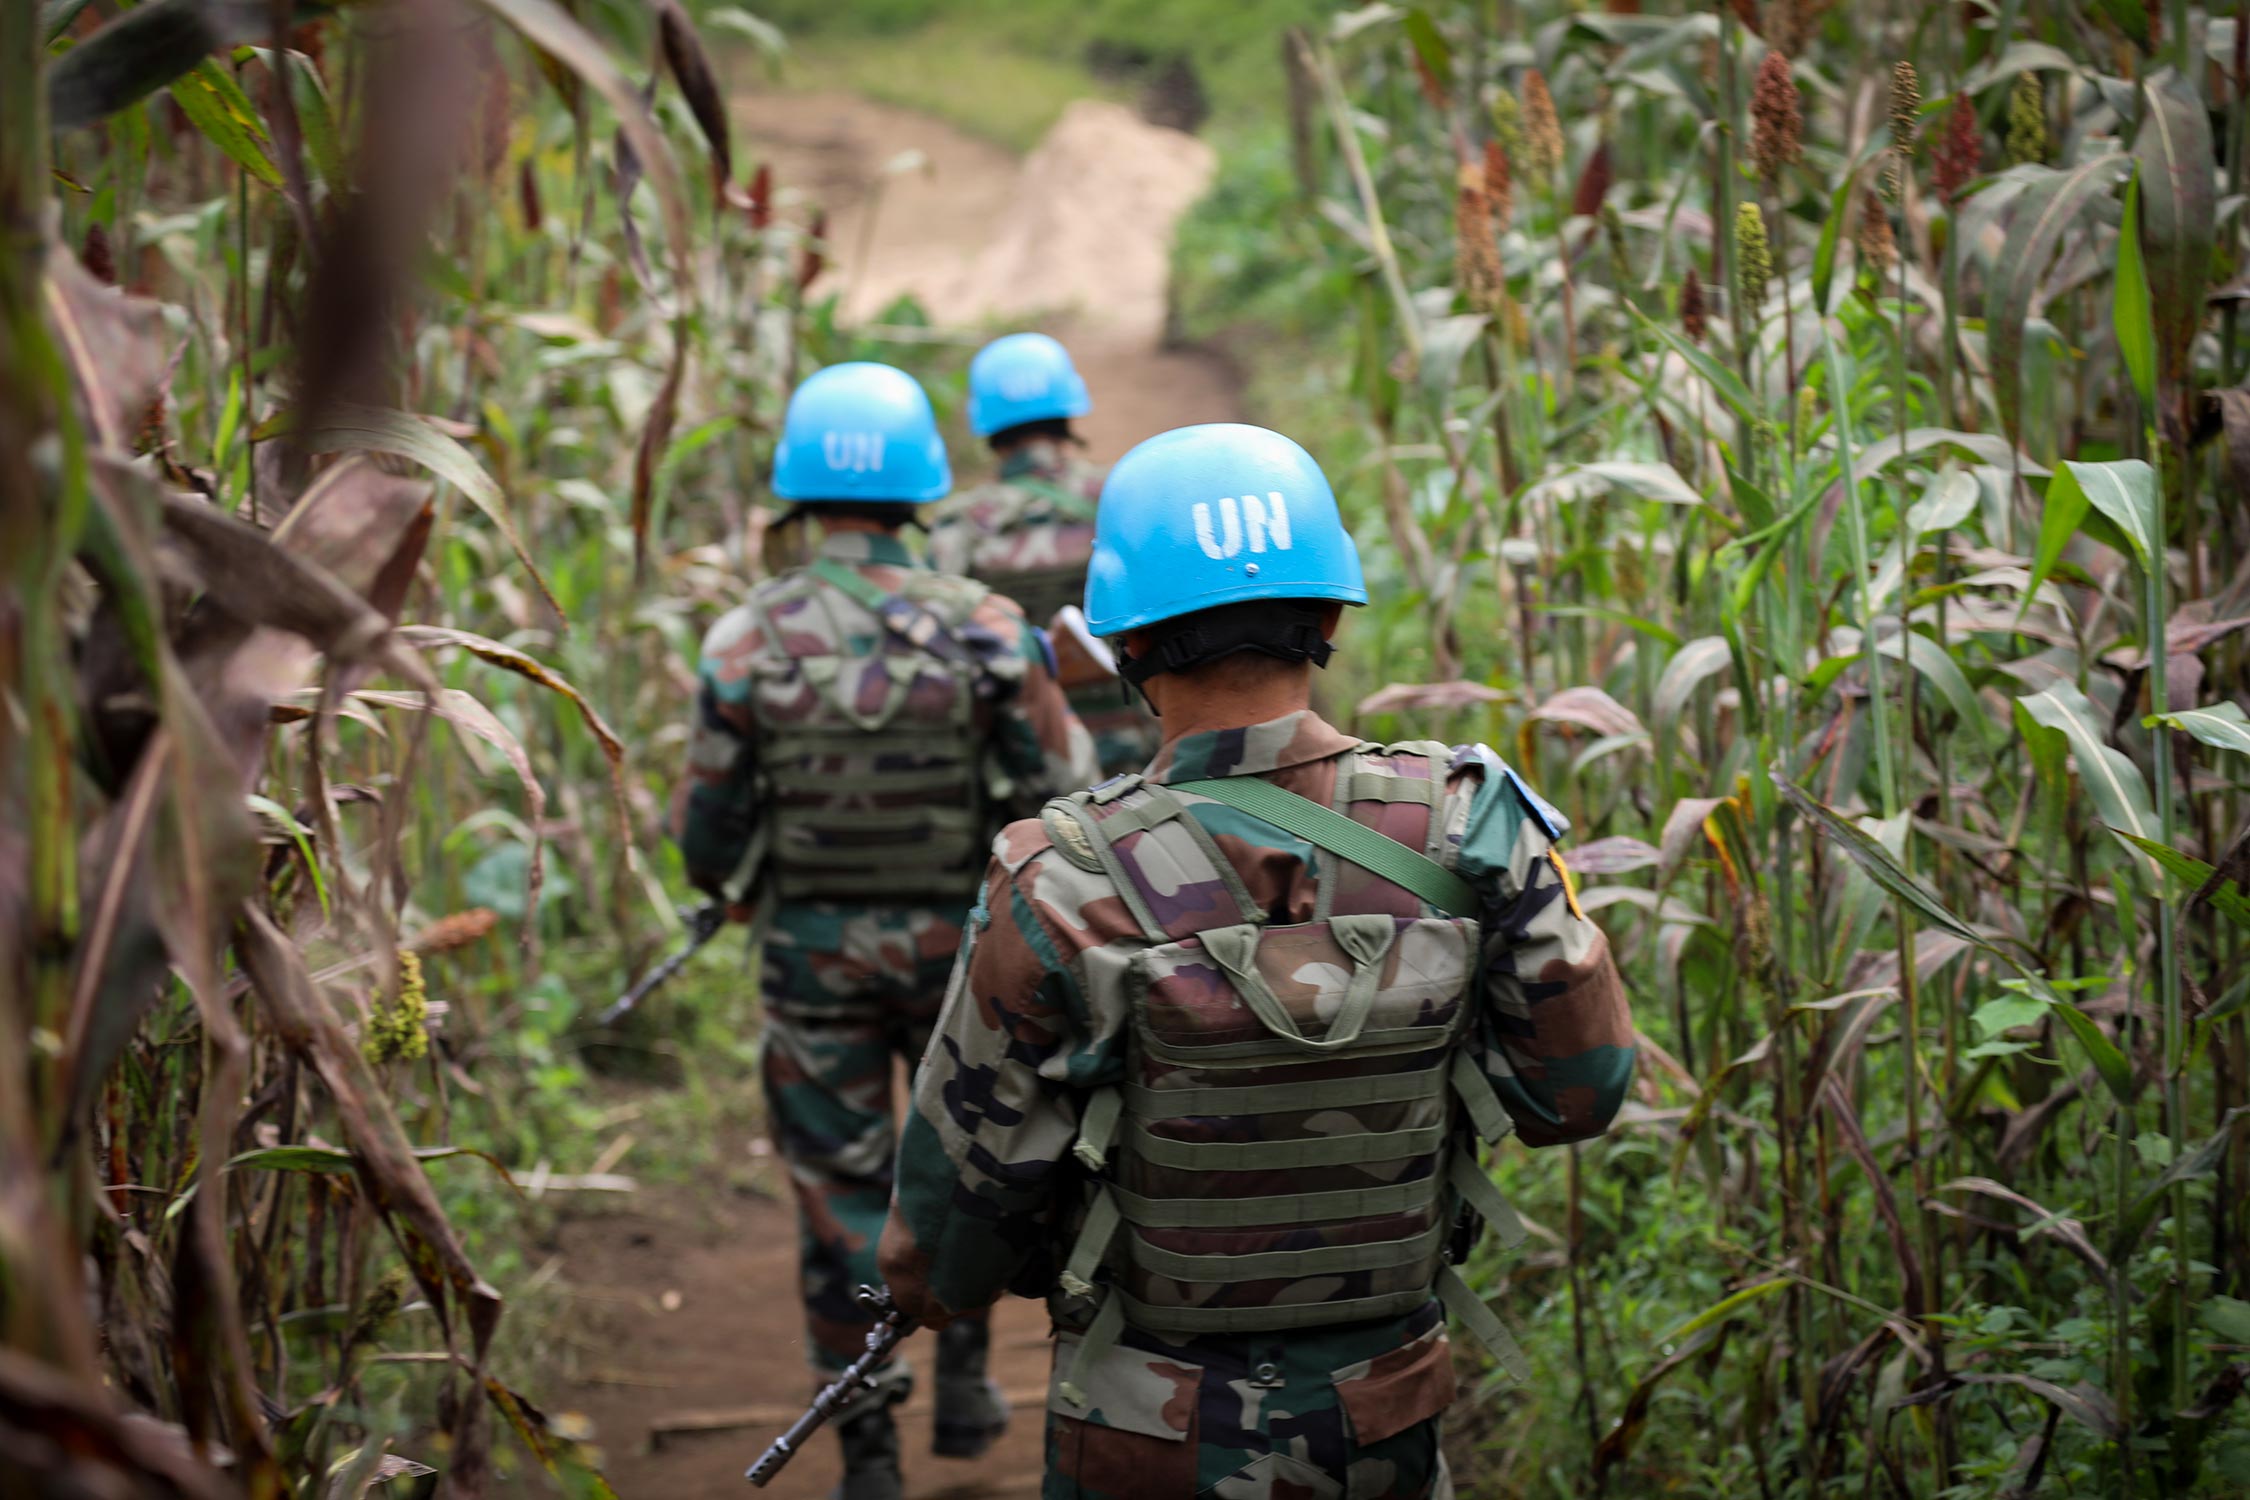 RDC to speed up MONUSCO’s withdrawal plan due by 2024